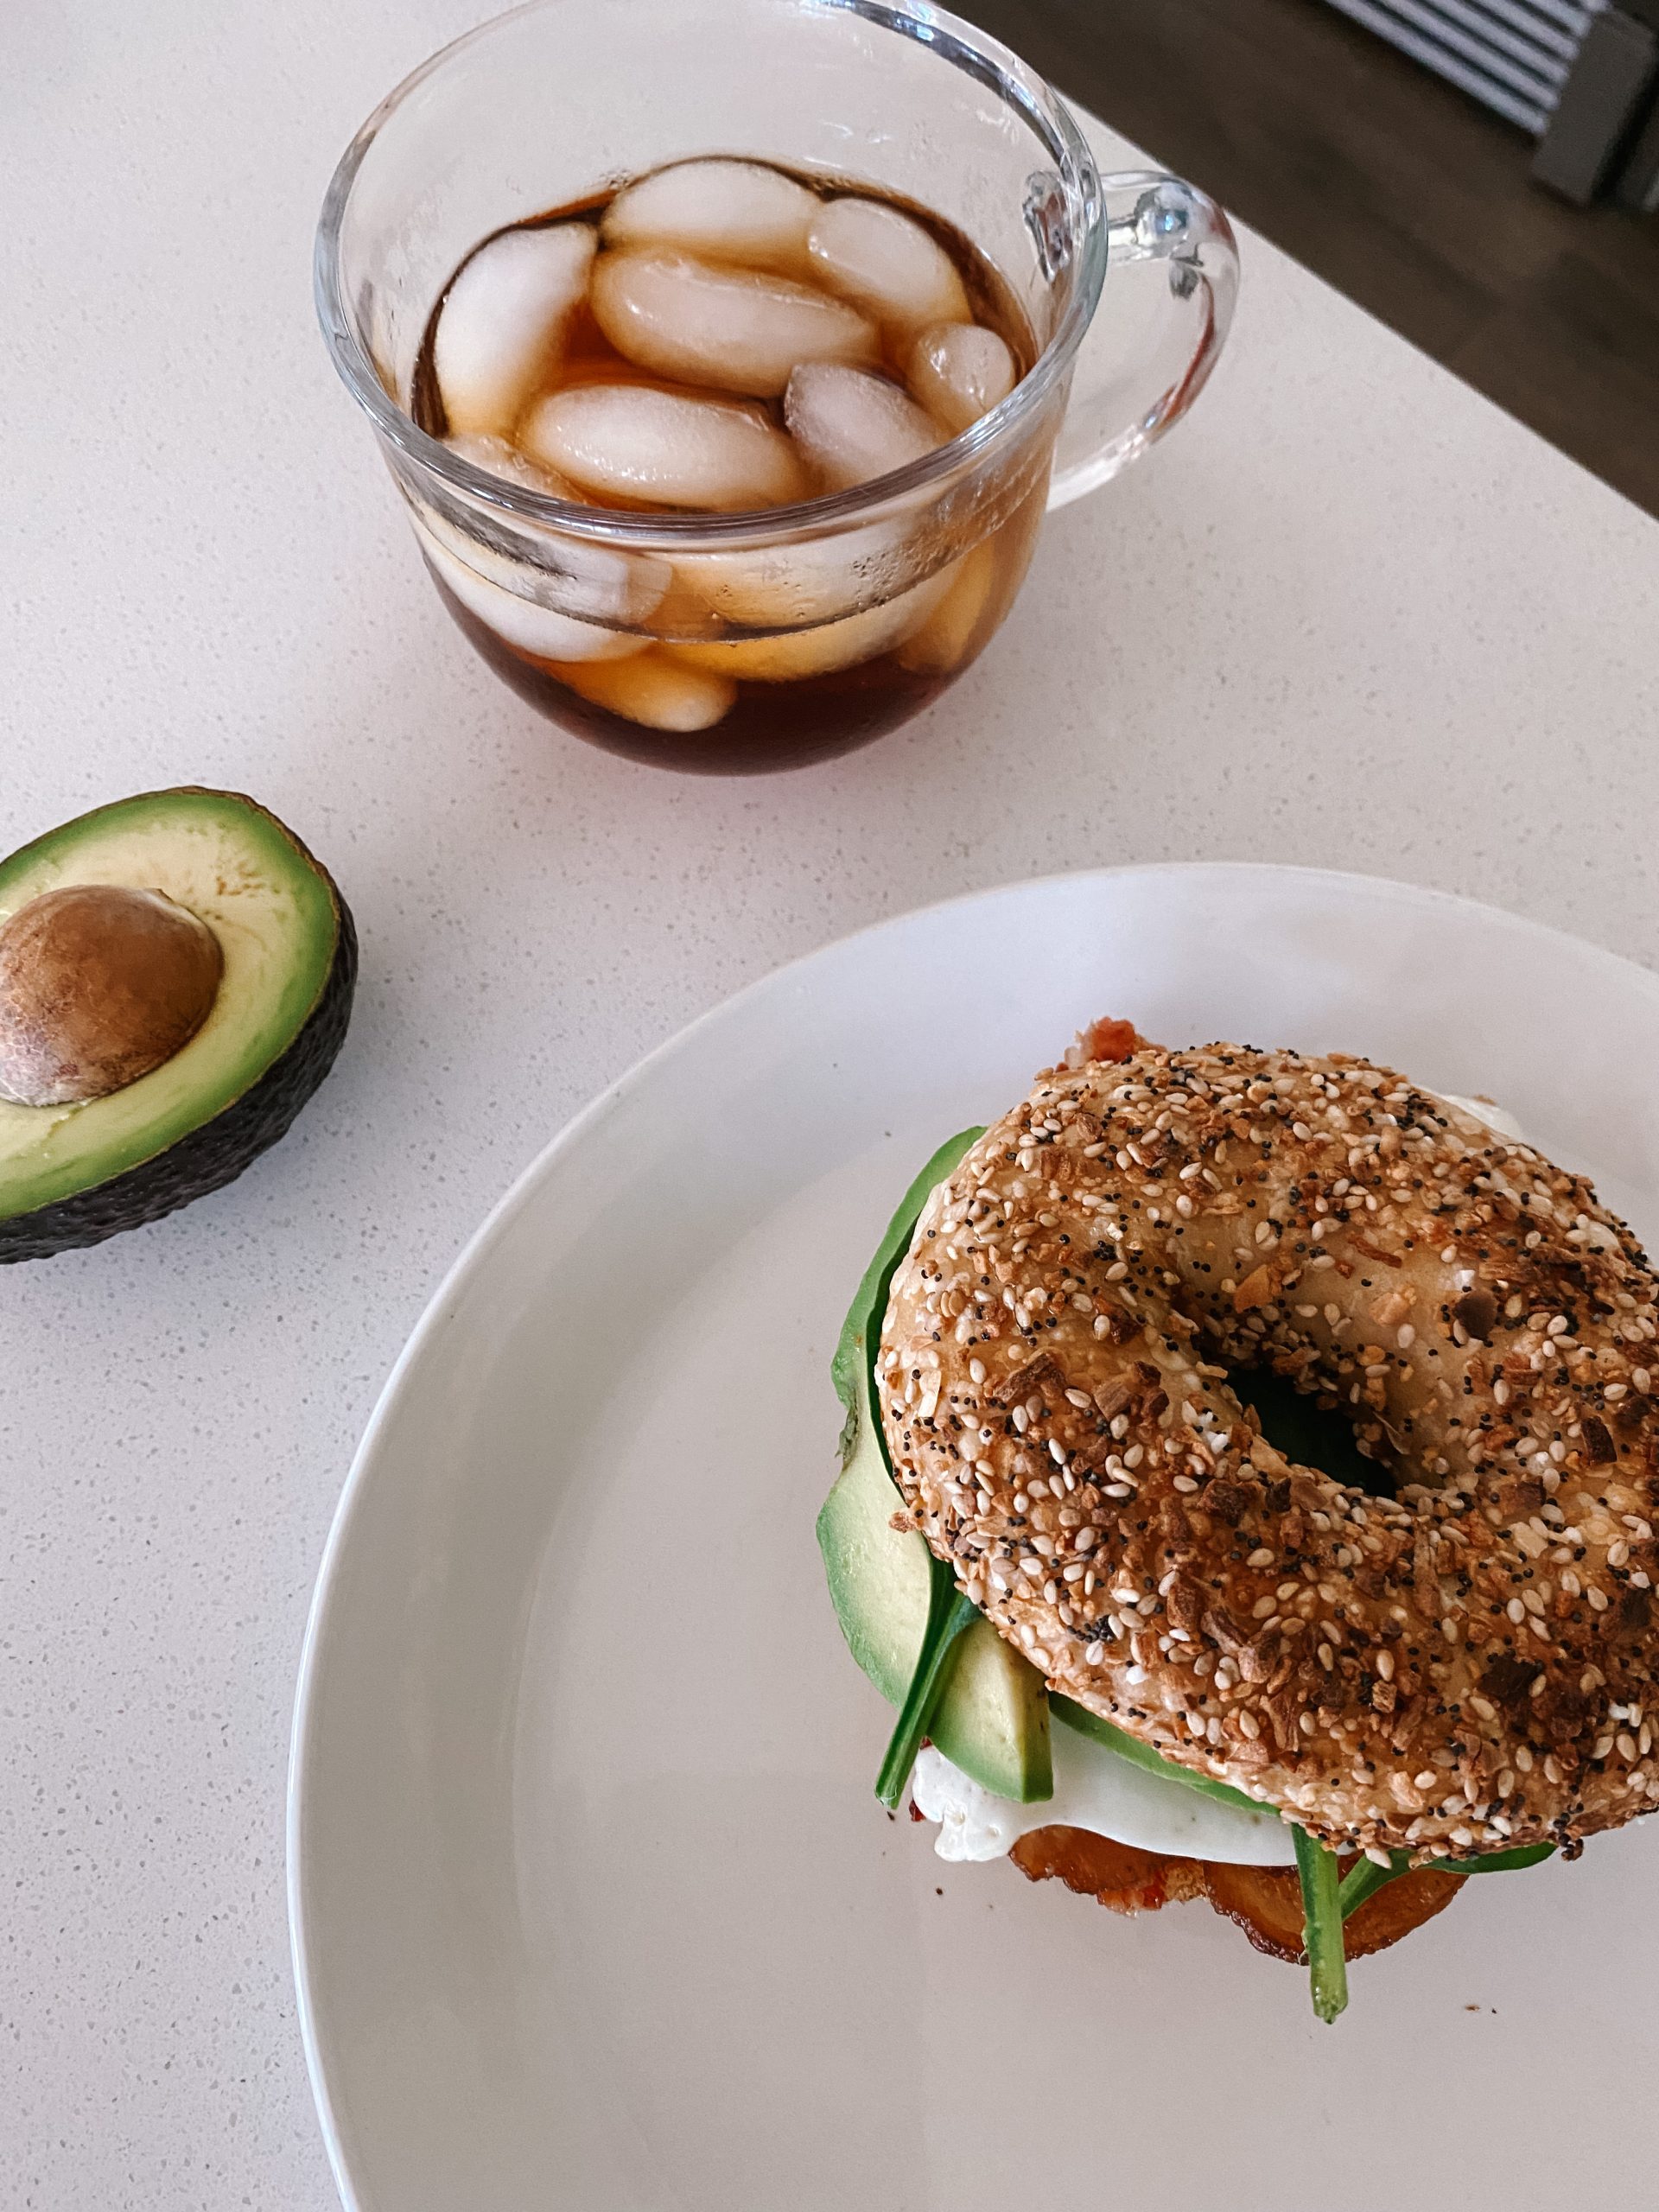 This Bacon Avocado Breakfast Bagel is one of my favorite go-to recipes! With it's crunchy texture and umami flavor, this breakfast meal can make for the perfect breakfast any day of the week! 